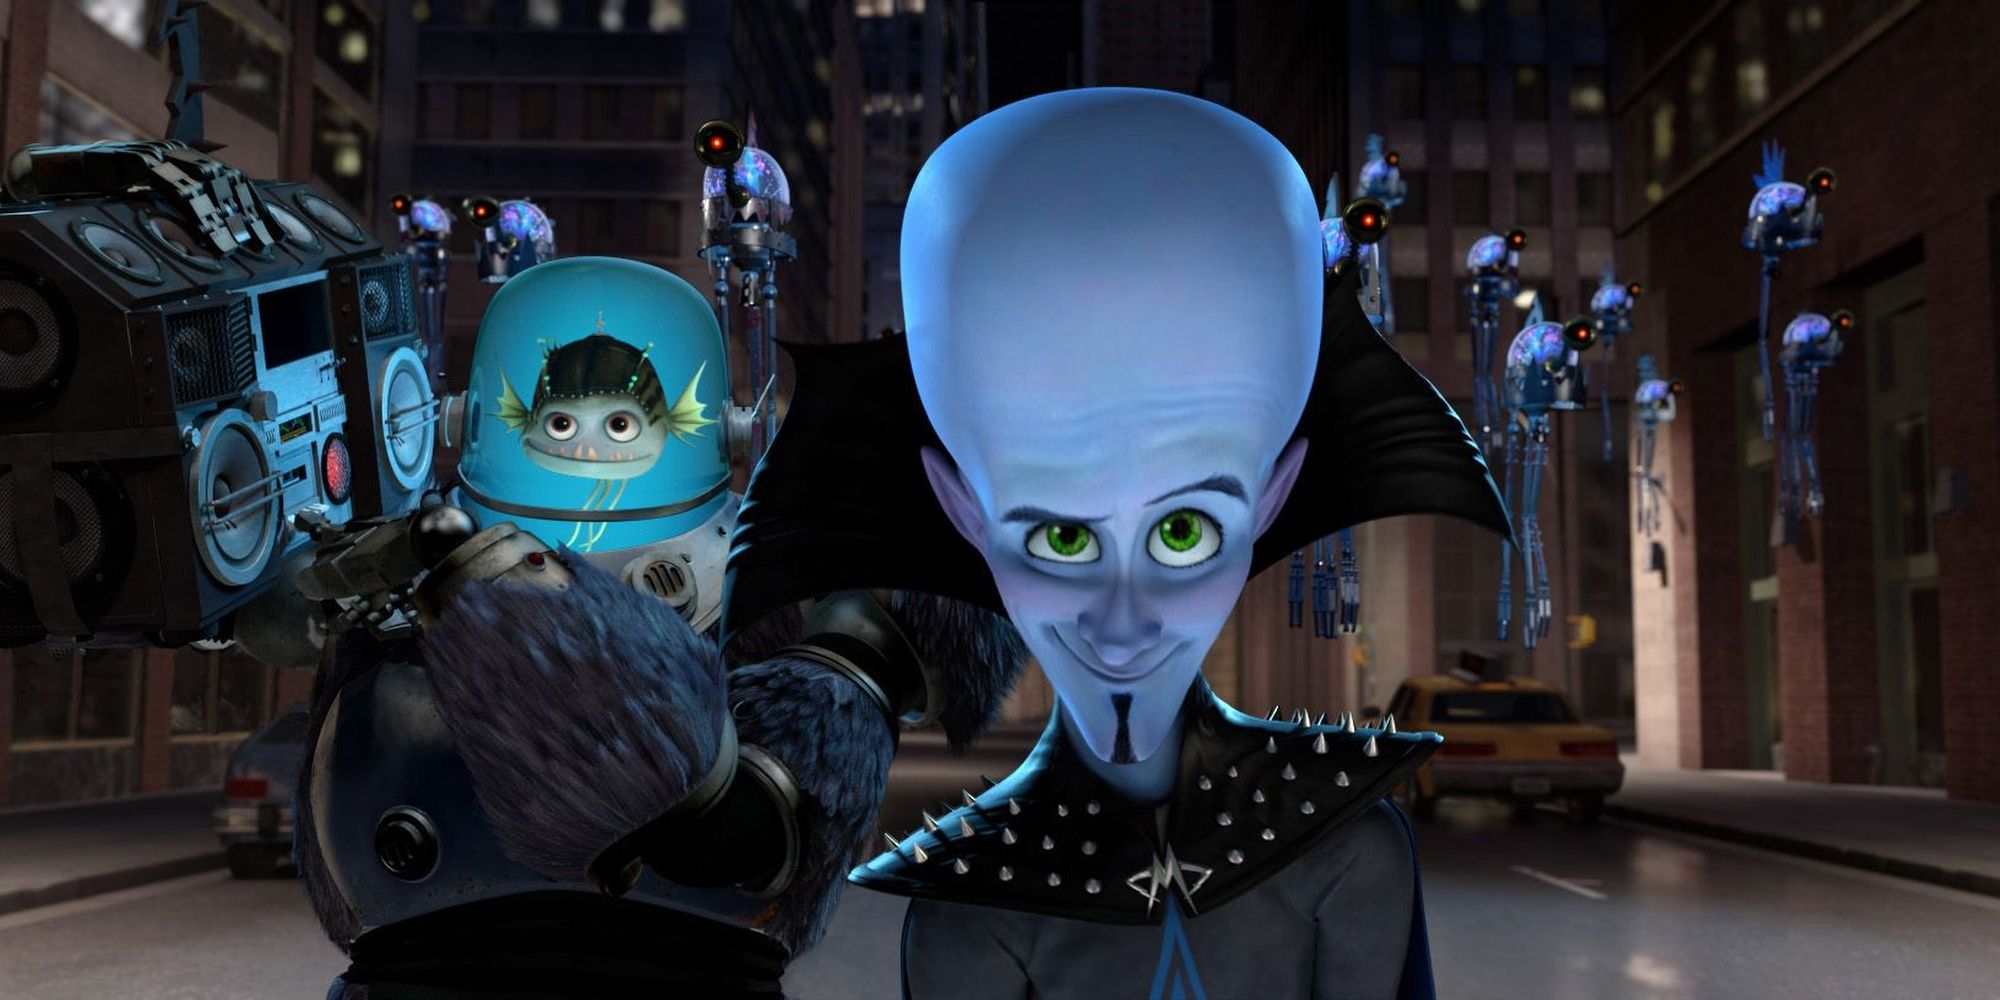 13 Great Sci-Fi Animated Movies to Check Out